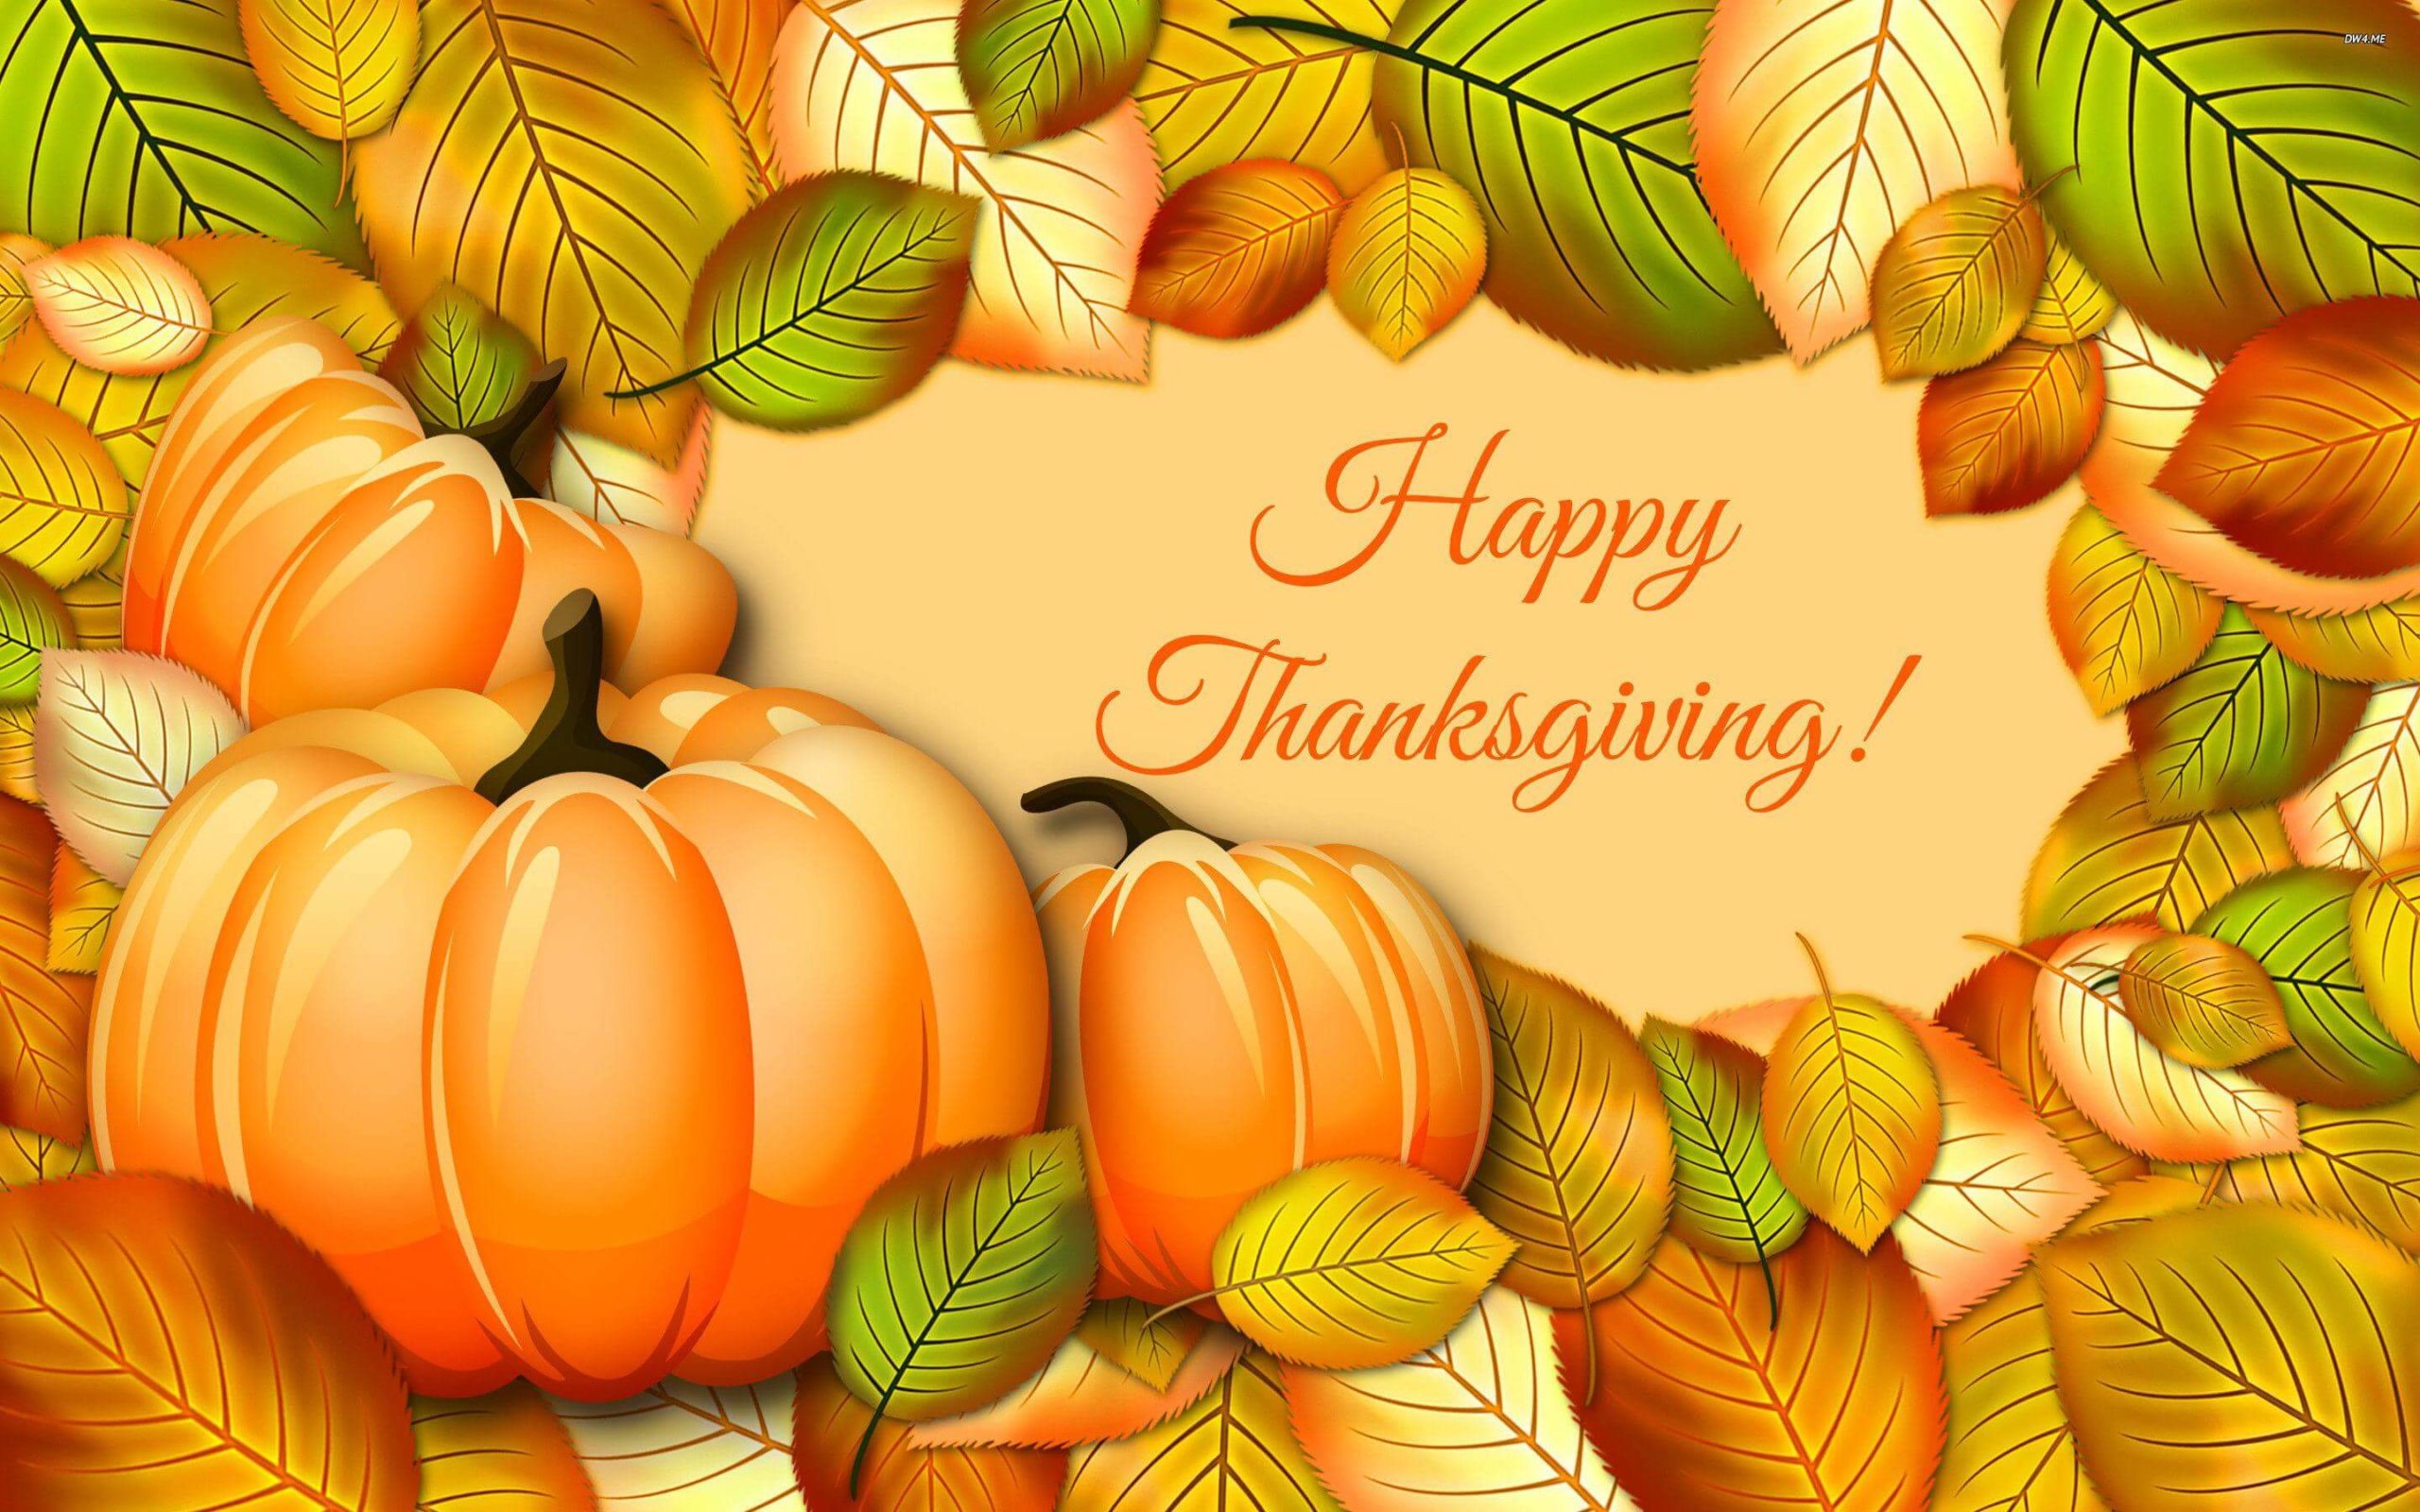 HD Thanksgiving Backgrounds for Free